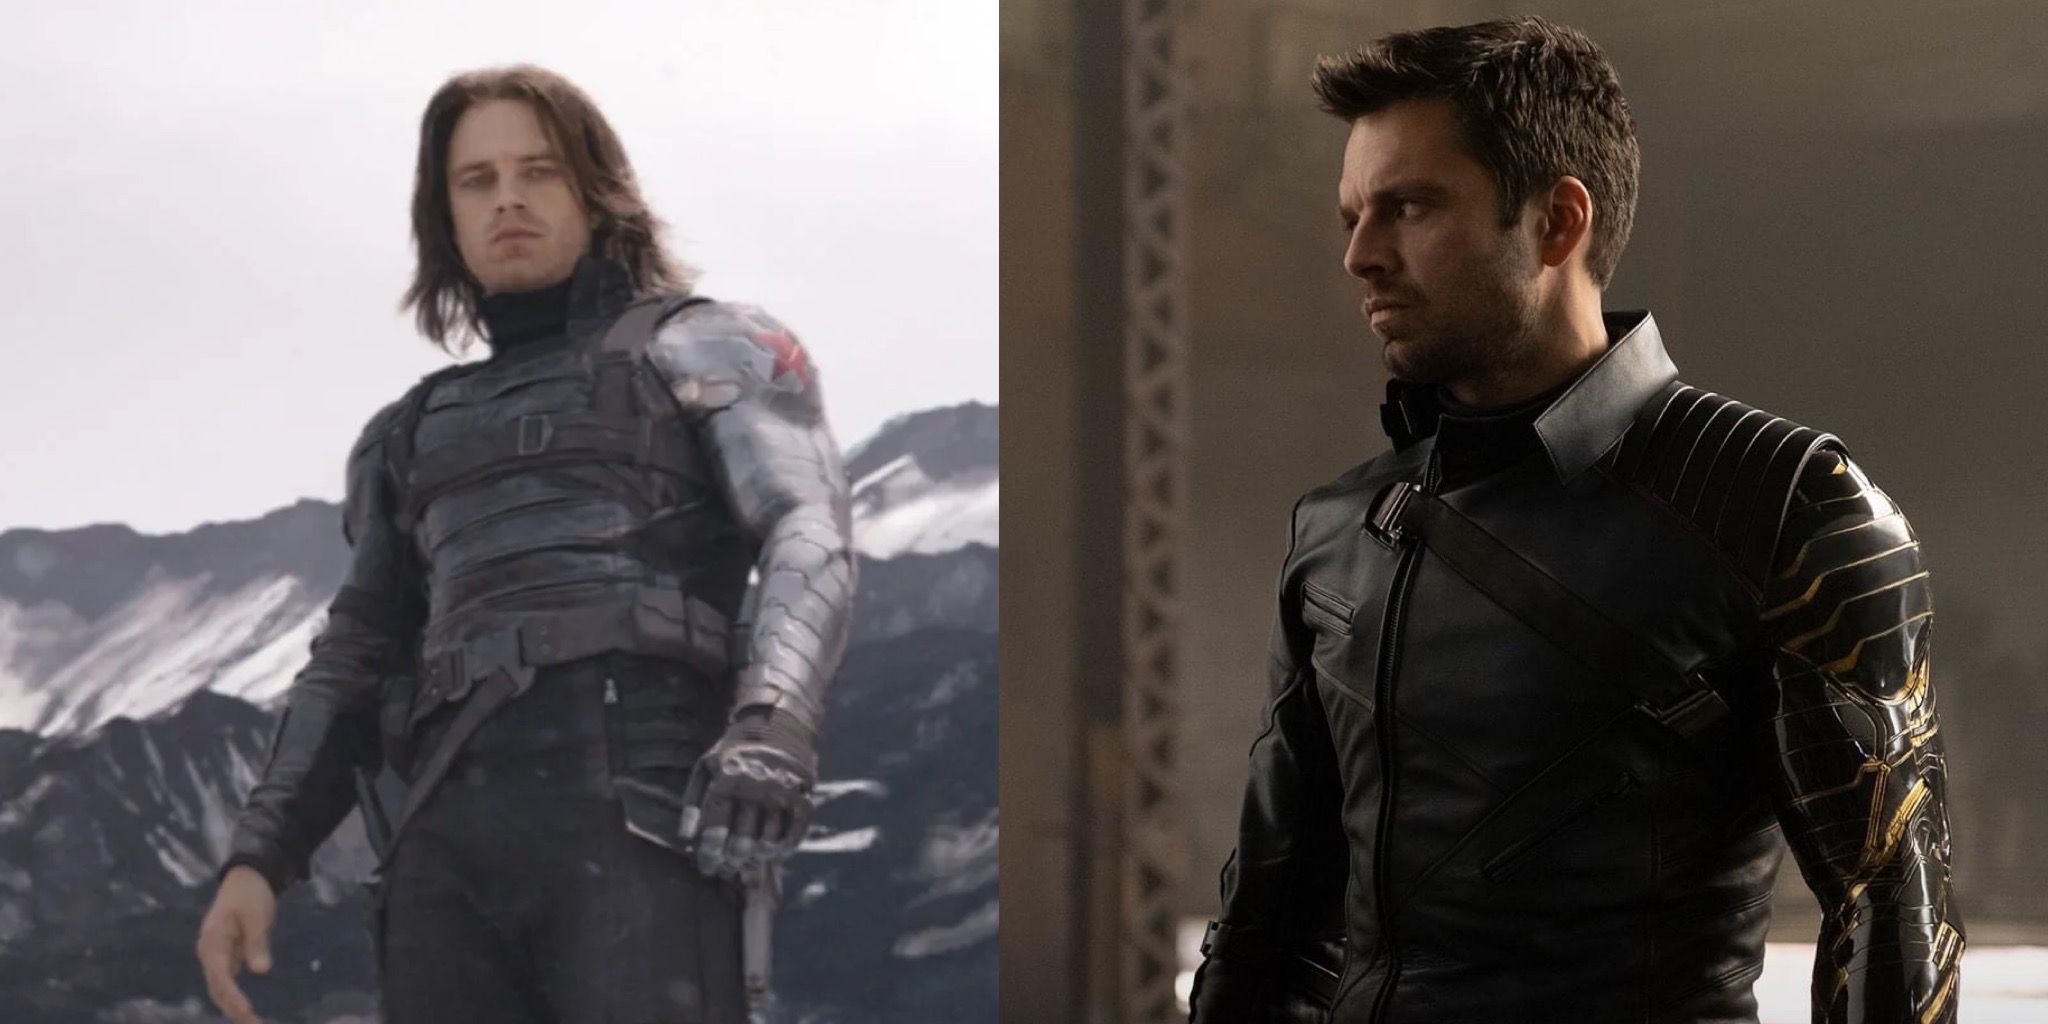 Sebastian Stan as Bucky Barnes in Civil War and The Falcon and The Winter Soldier